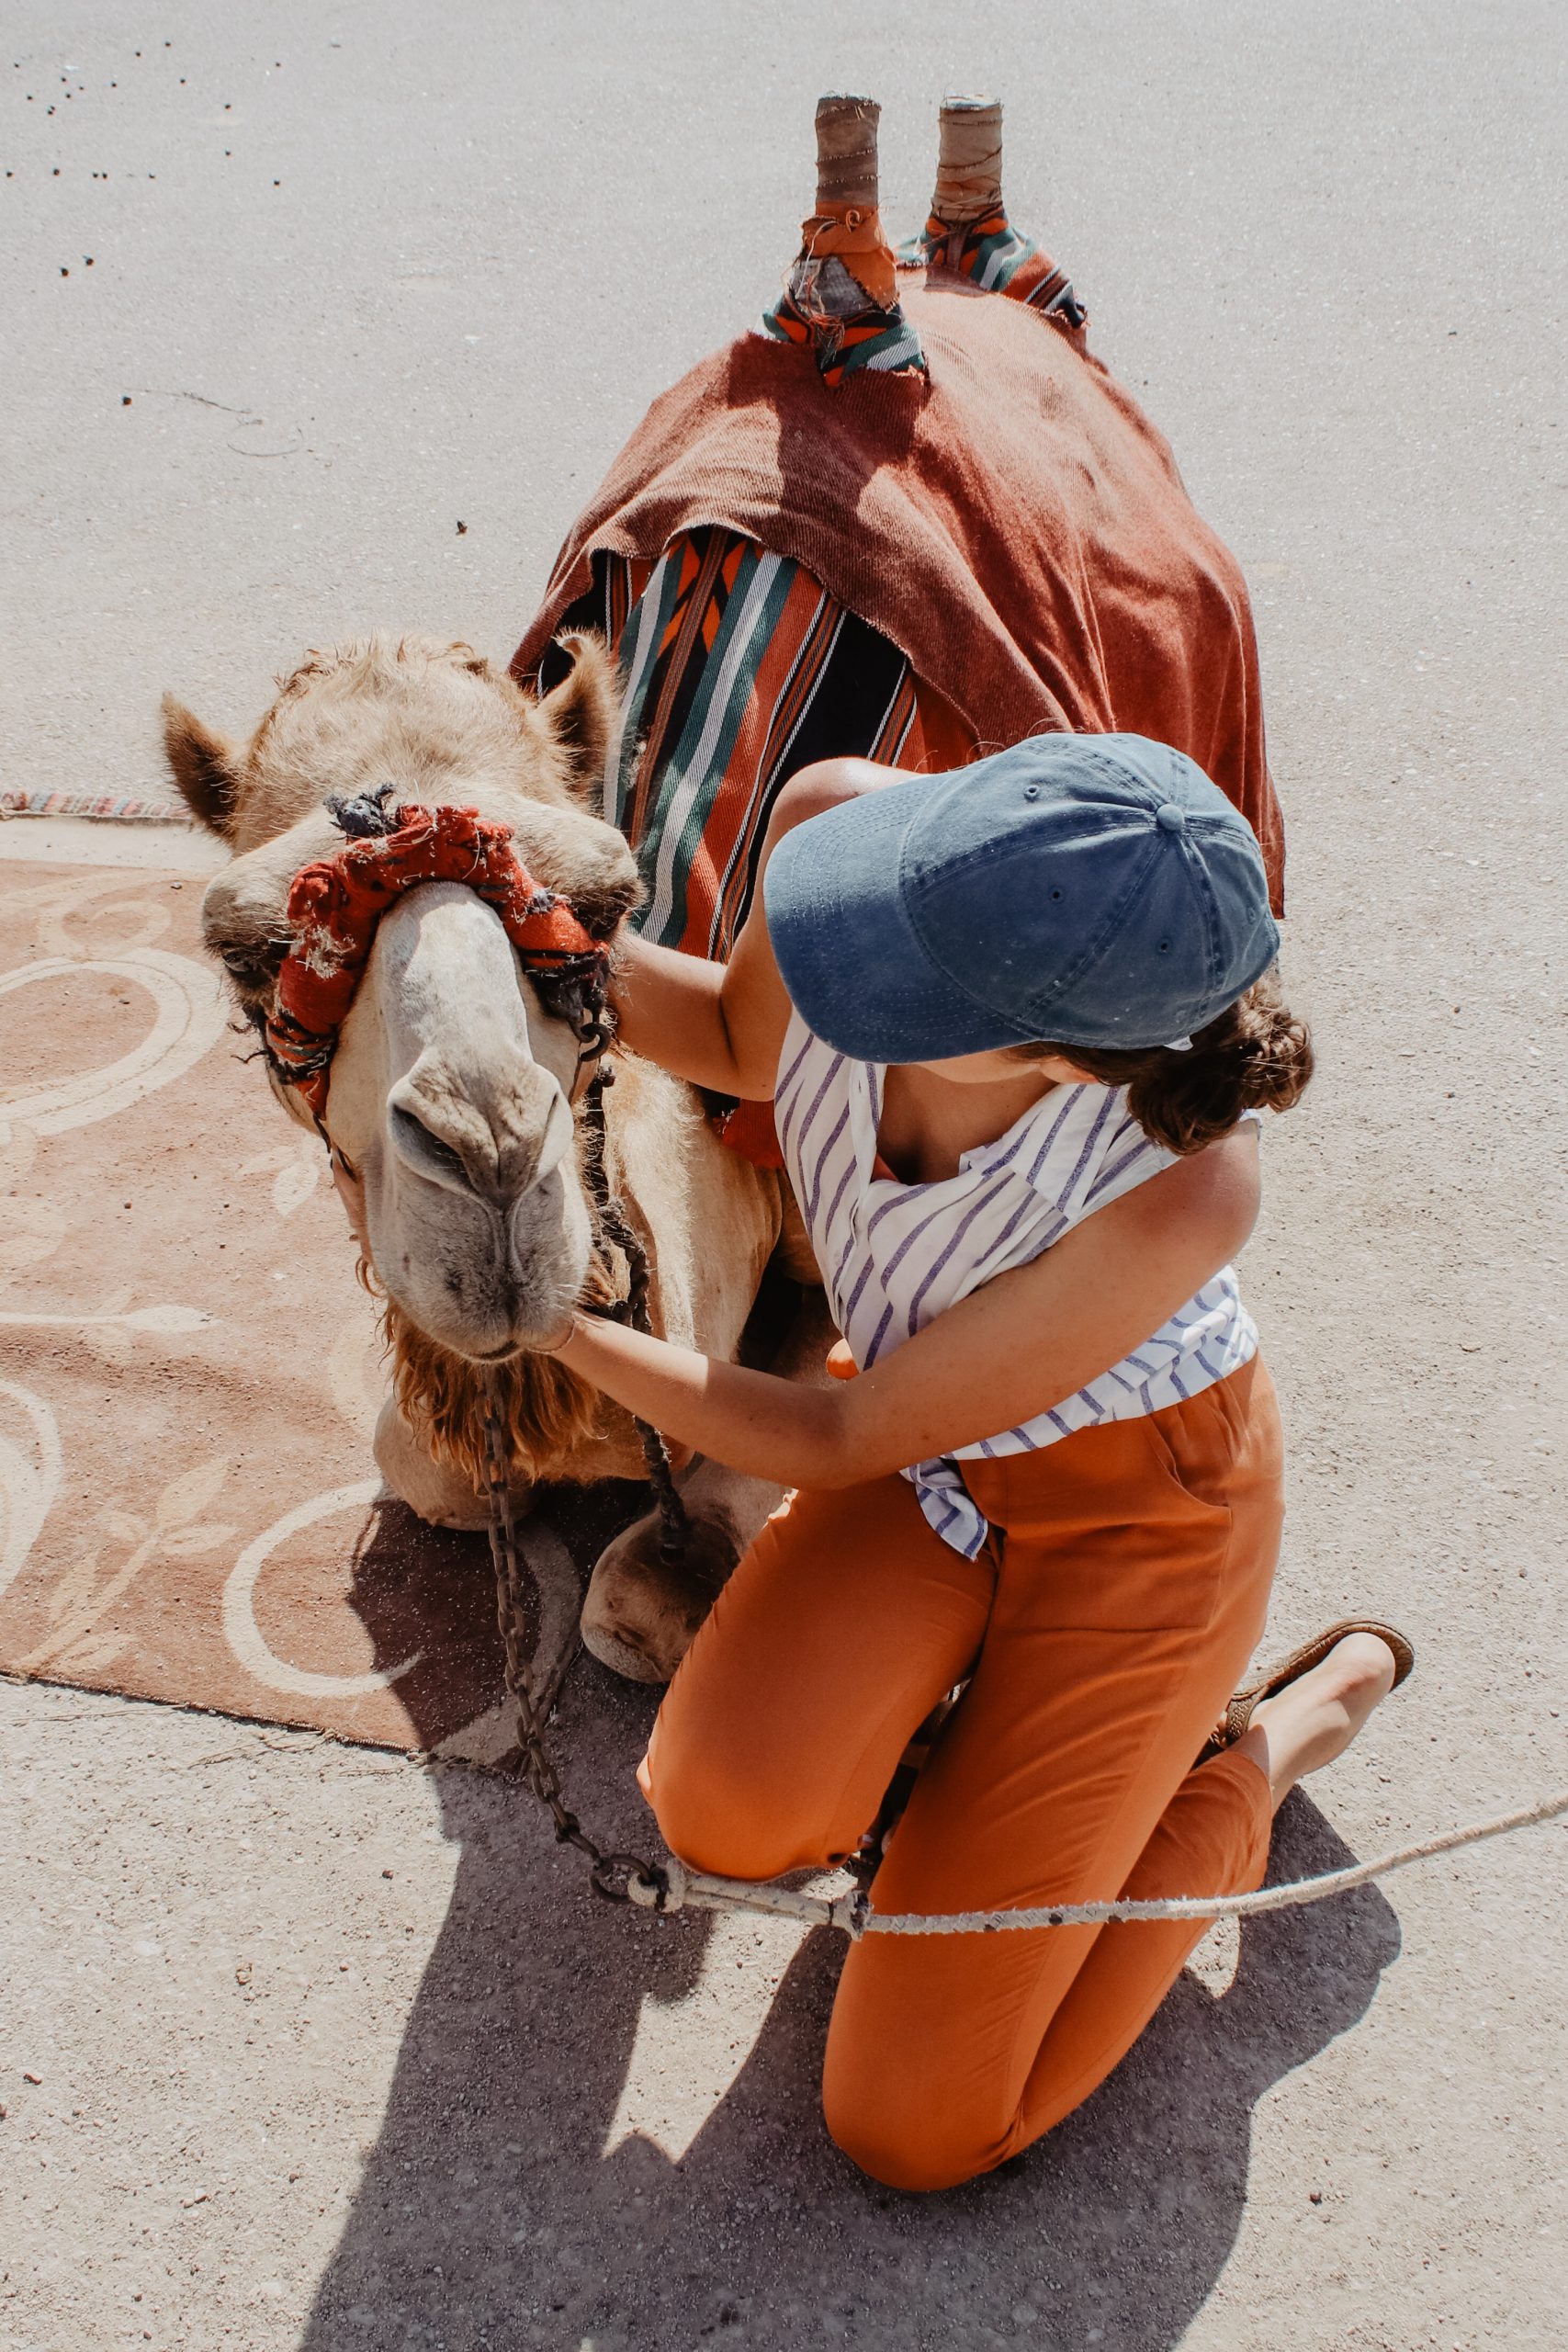 gallery image for Shared Camel Ride Palm Oasis Marrakech